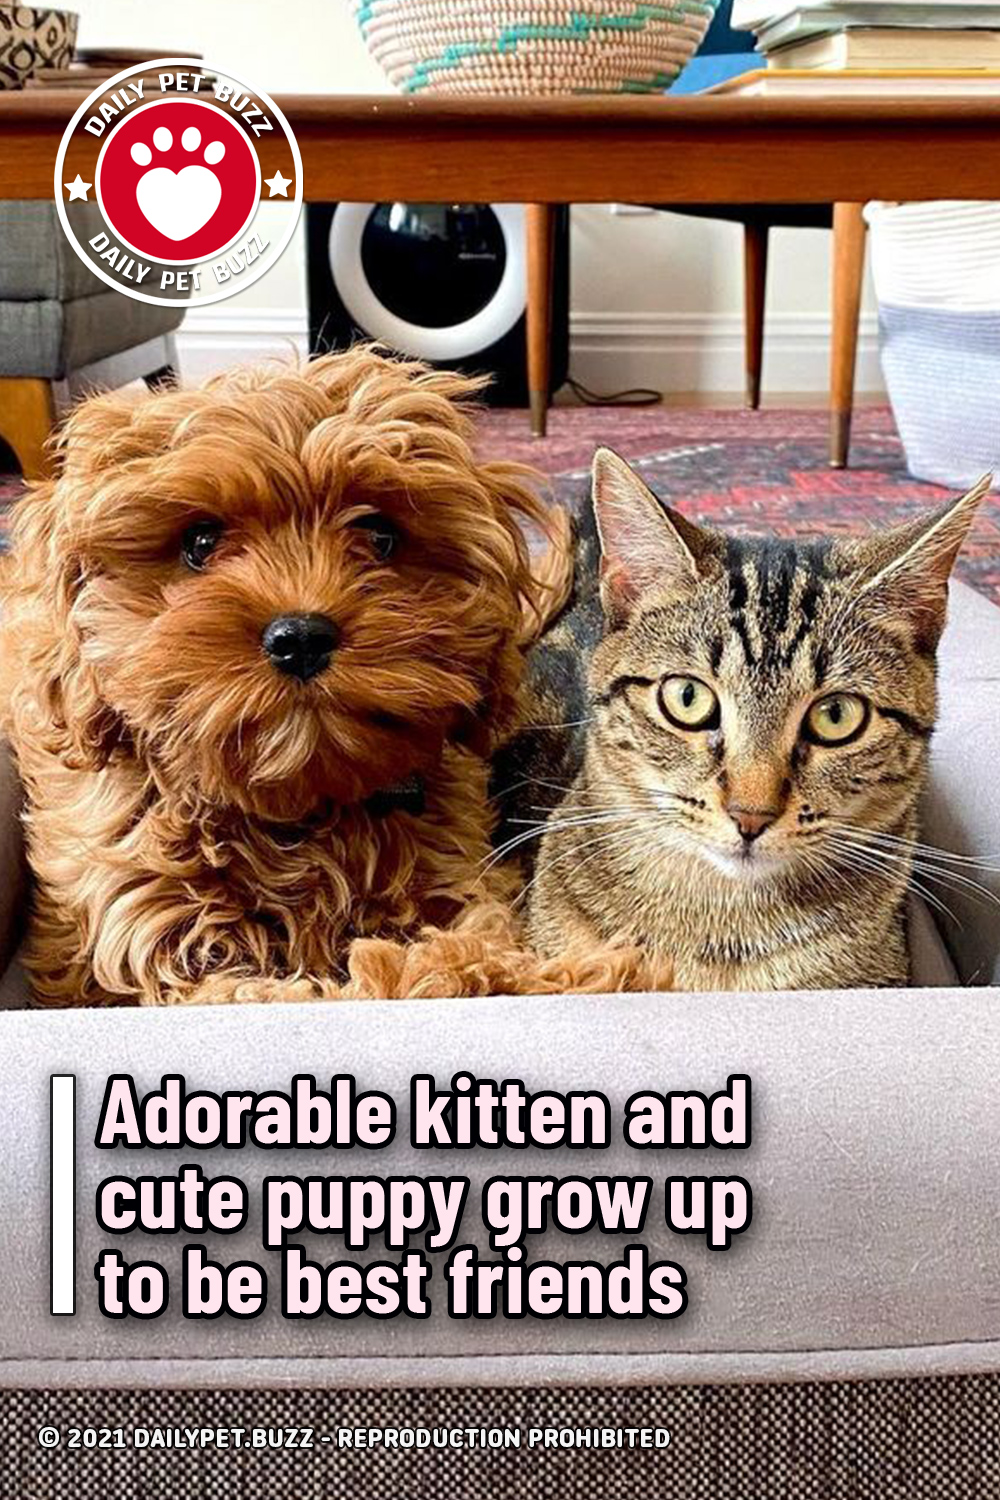 Adorable kitten and cute puppy grow up to be best friends